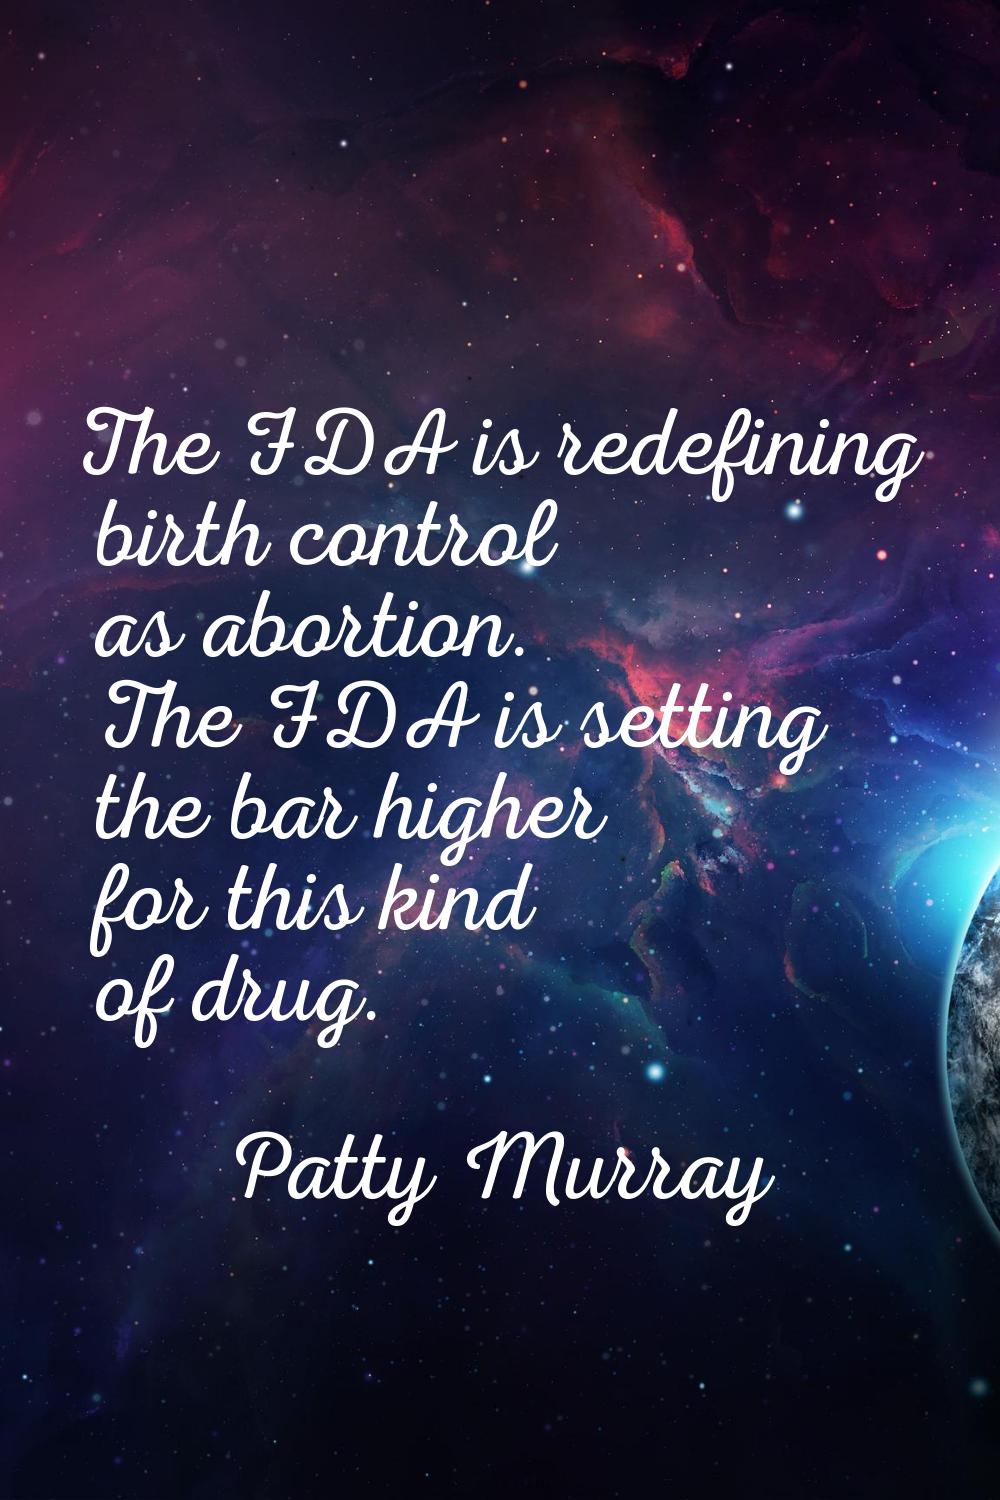 The FDA is redefining birth control as abortion. The FDA is setting the bar higher for this kind of